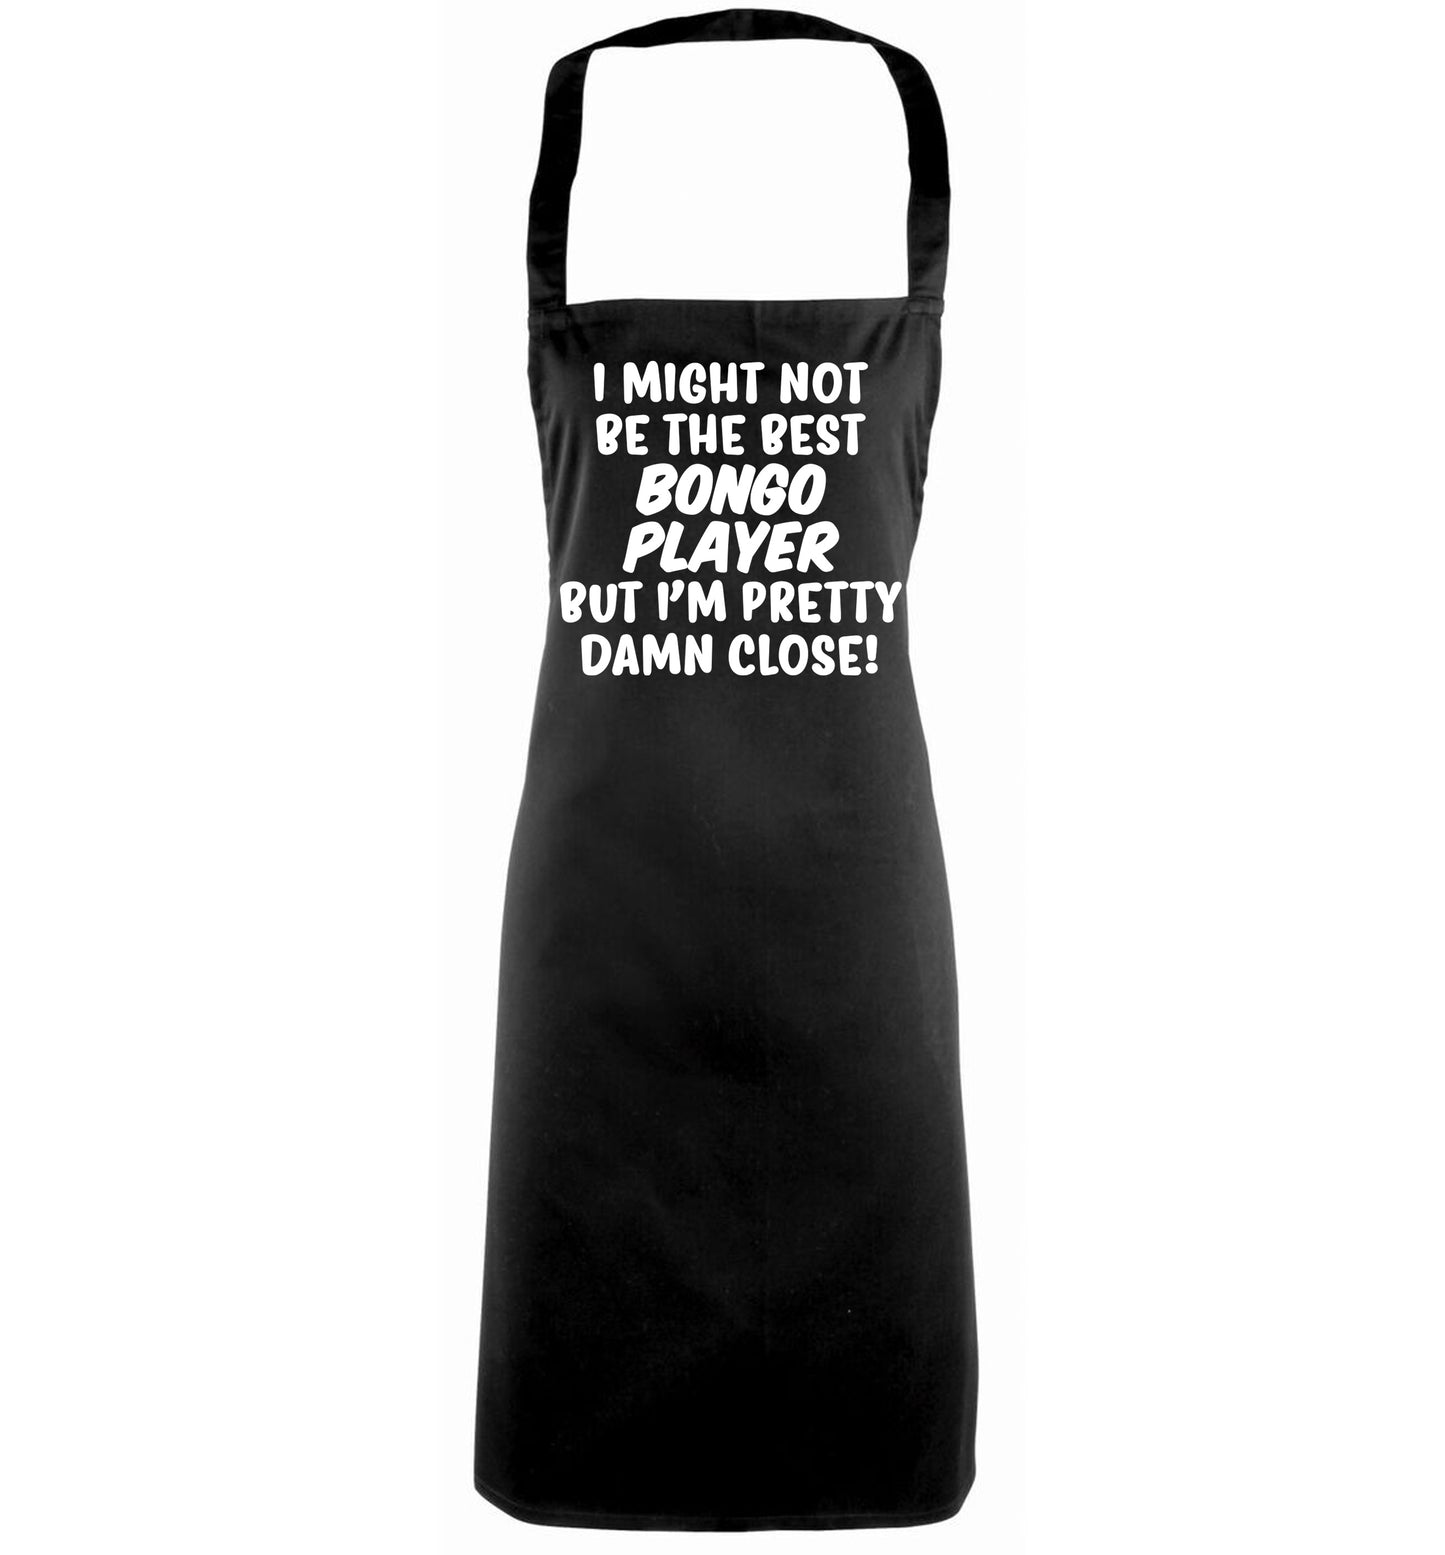 I might not be the best bongo player but I'm pretty close! black apron